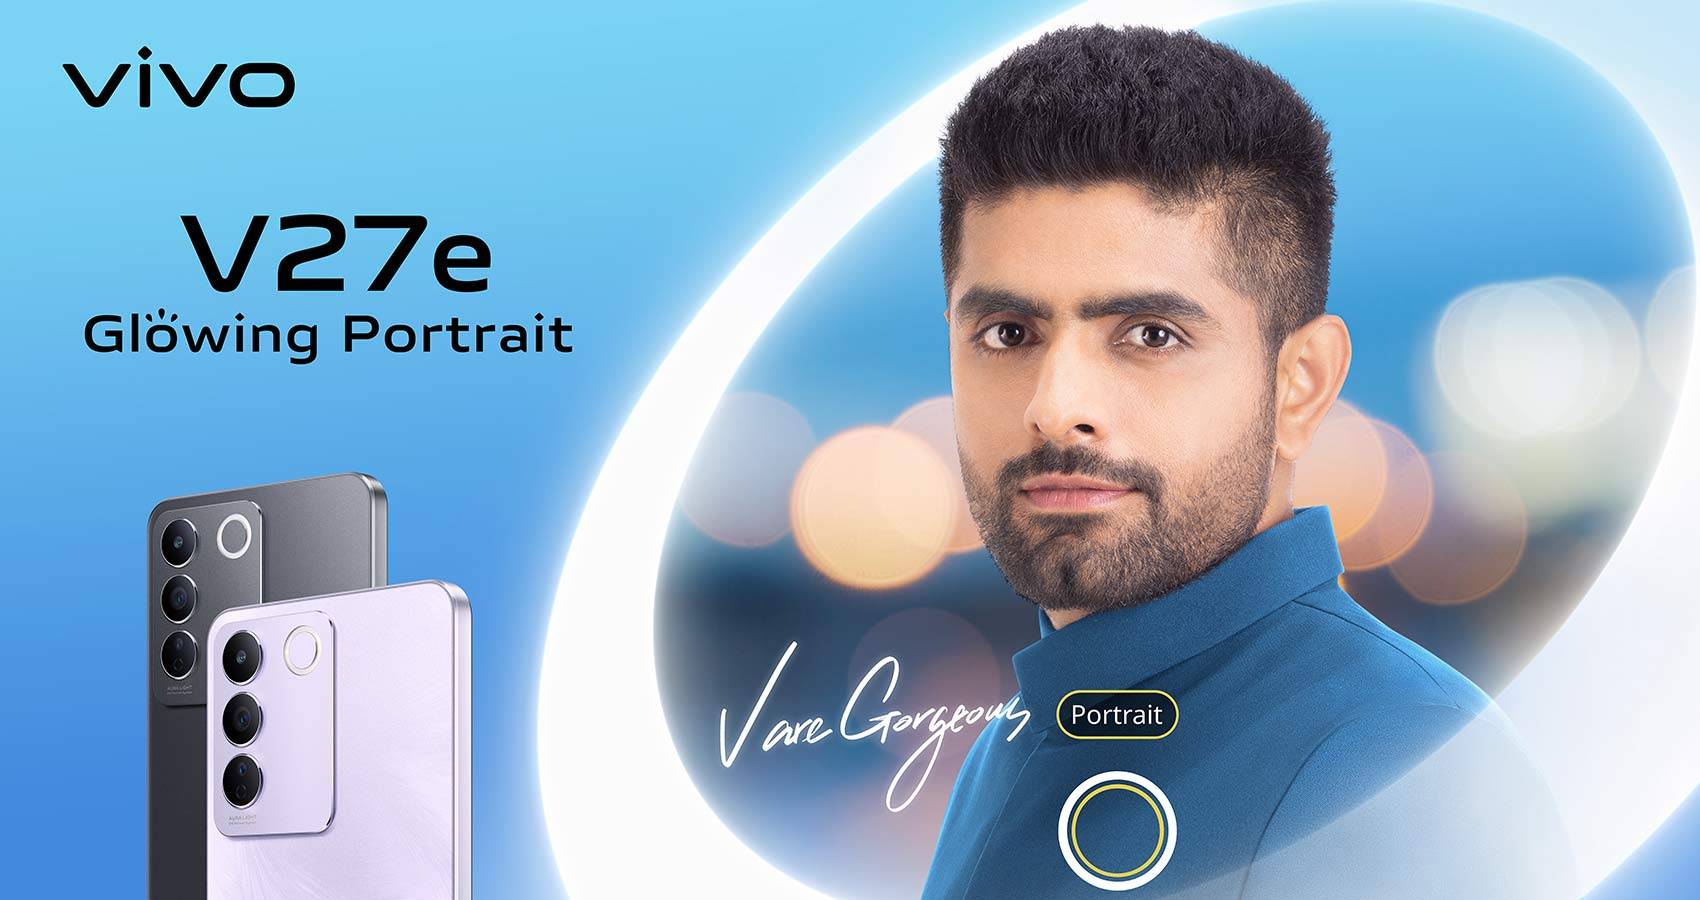 Vivo has recently introduced the stunning V27e in Pakistan, equipped with an Aura Light Portrait feature.